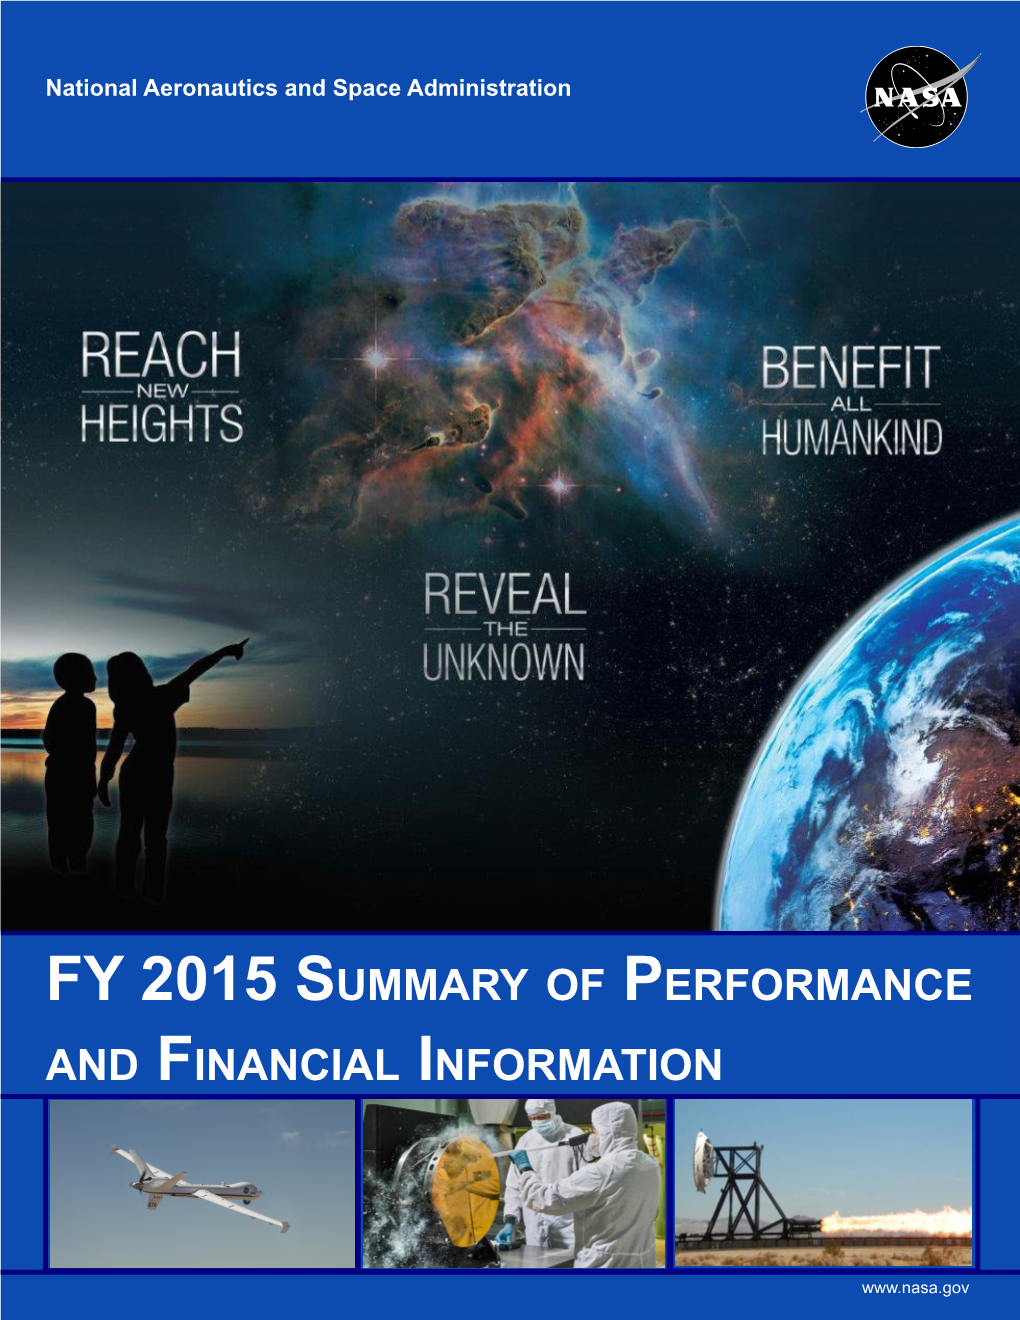 FY 2015 Summary of Performance and Financial Information